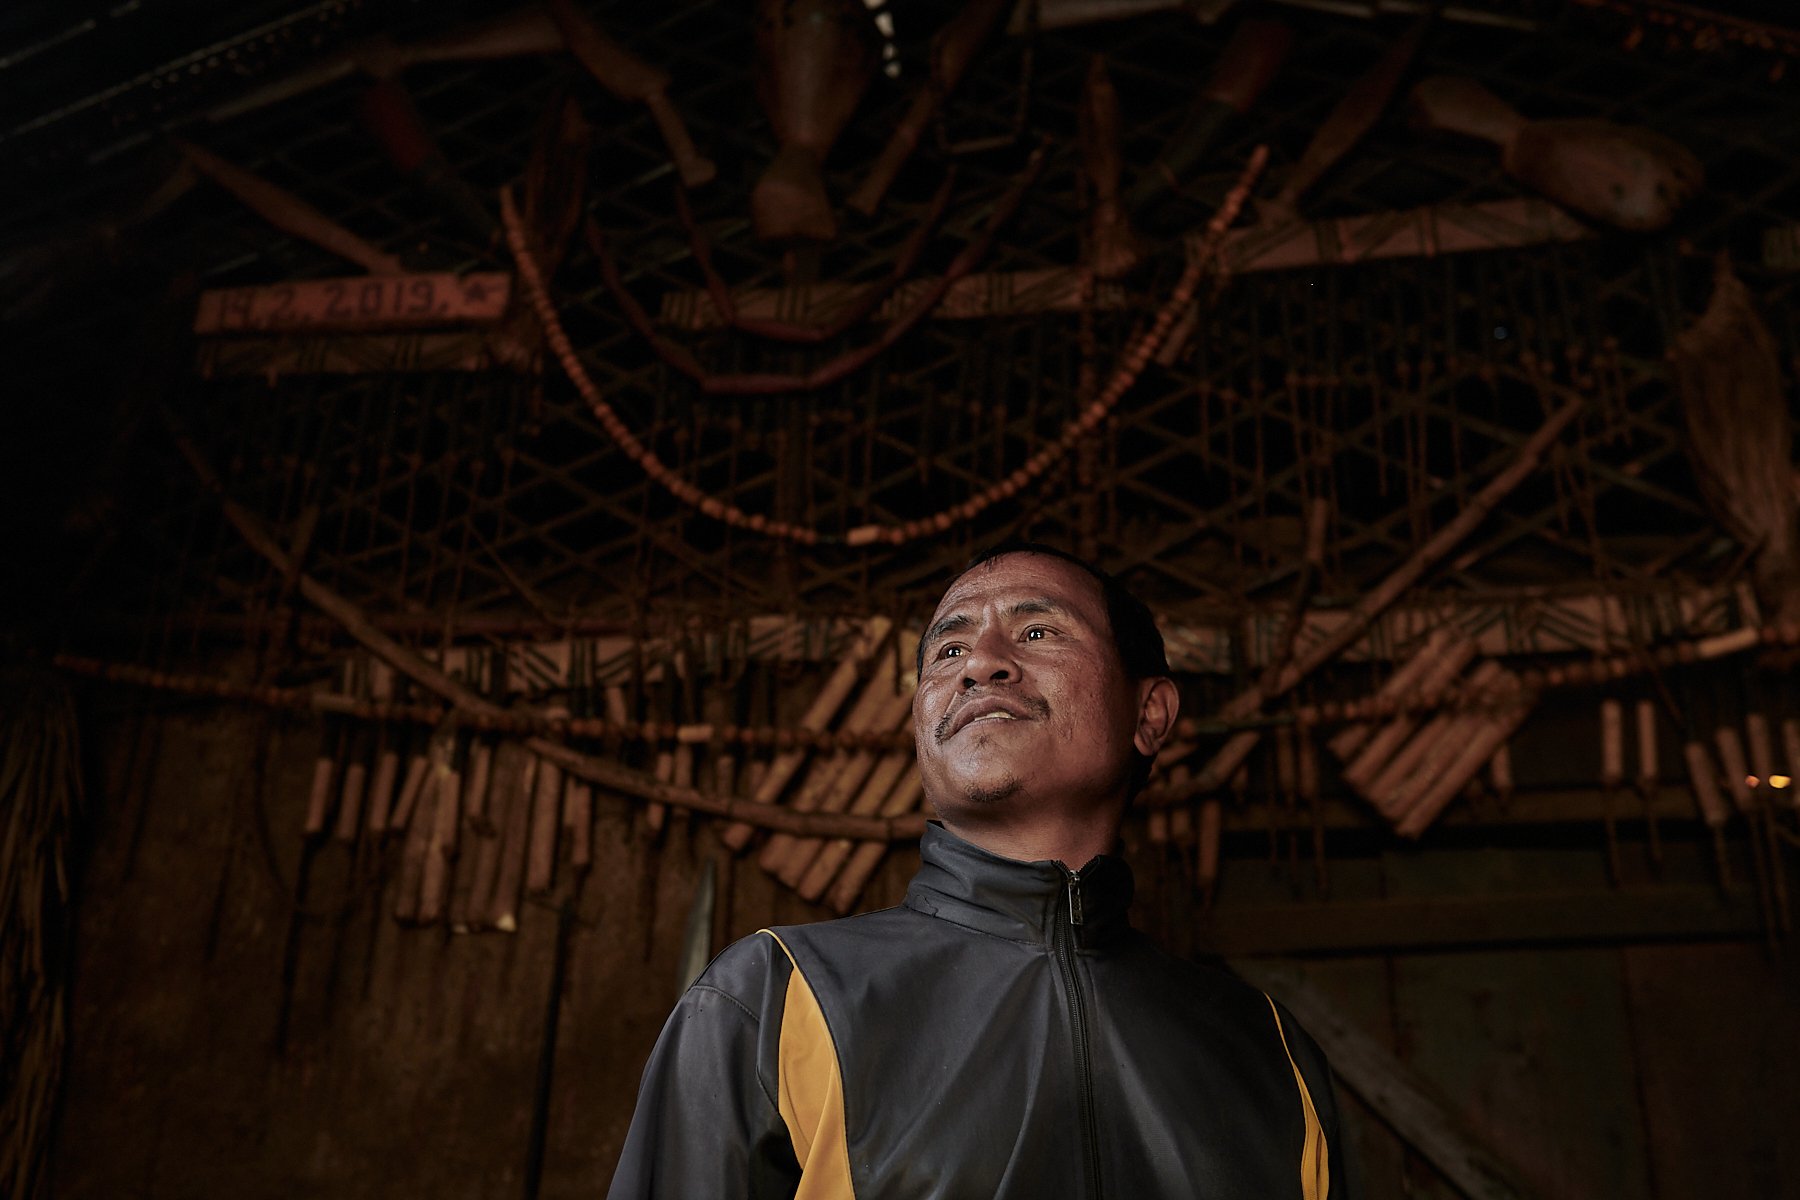 Michael, a modern Ao Naga, working as a guide for local visitors